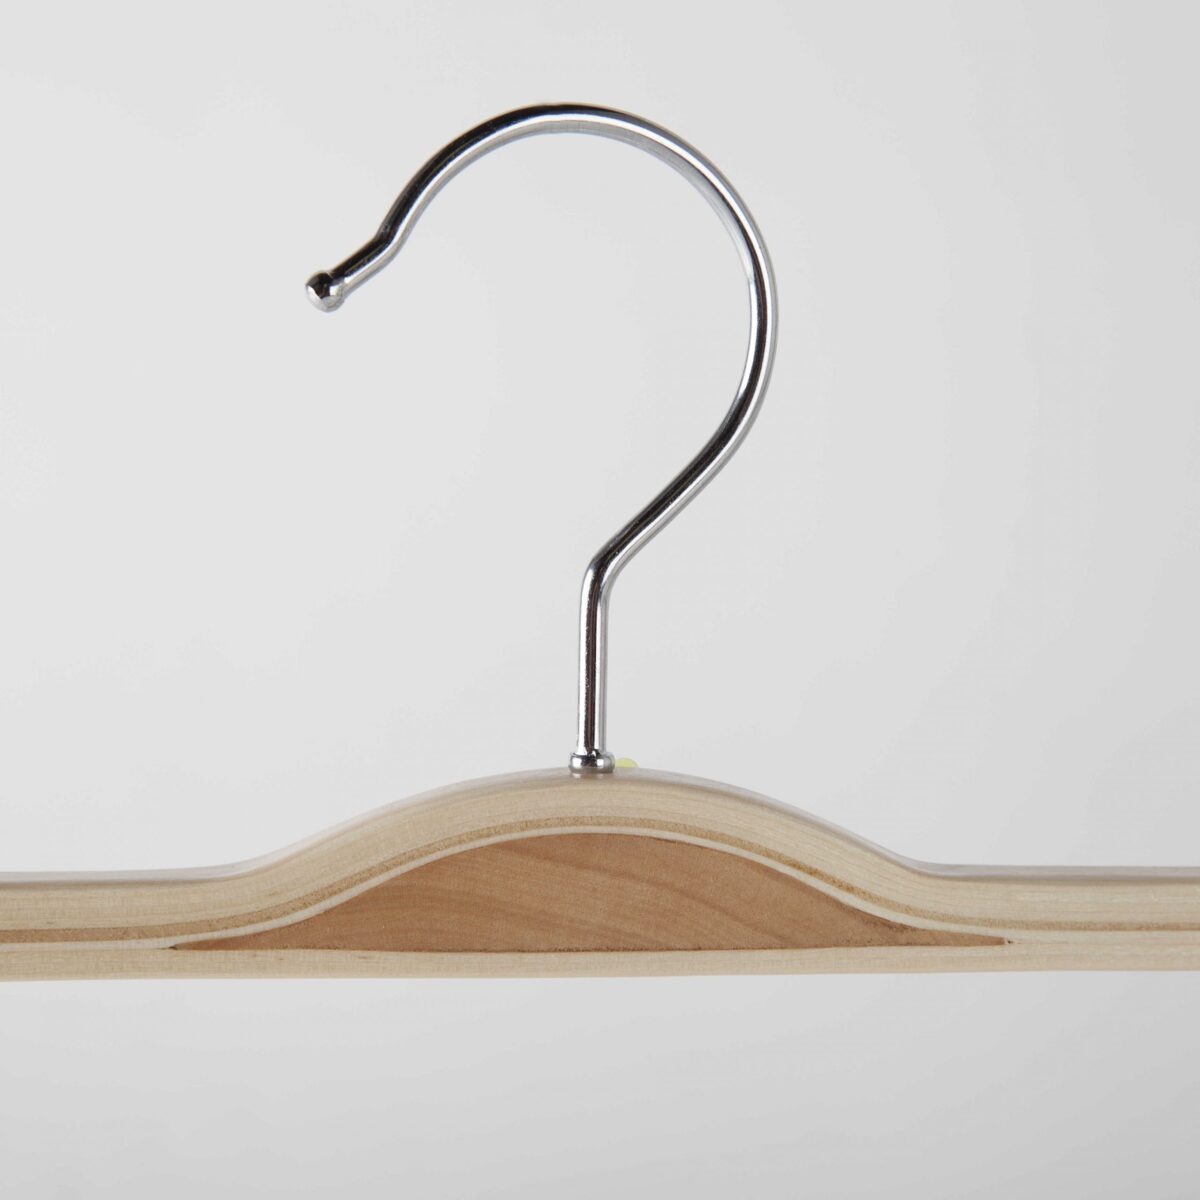 Laminated Wooden Trouser Hangers (370 mm)